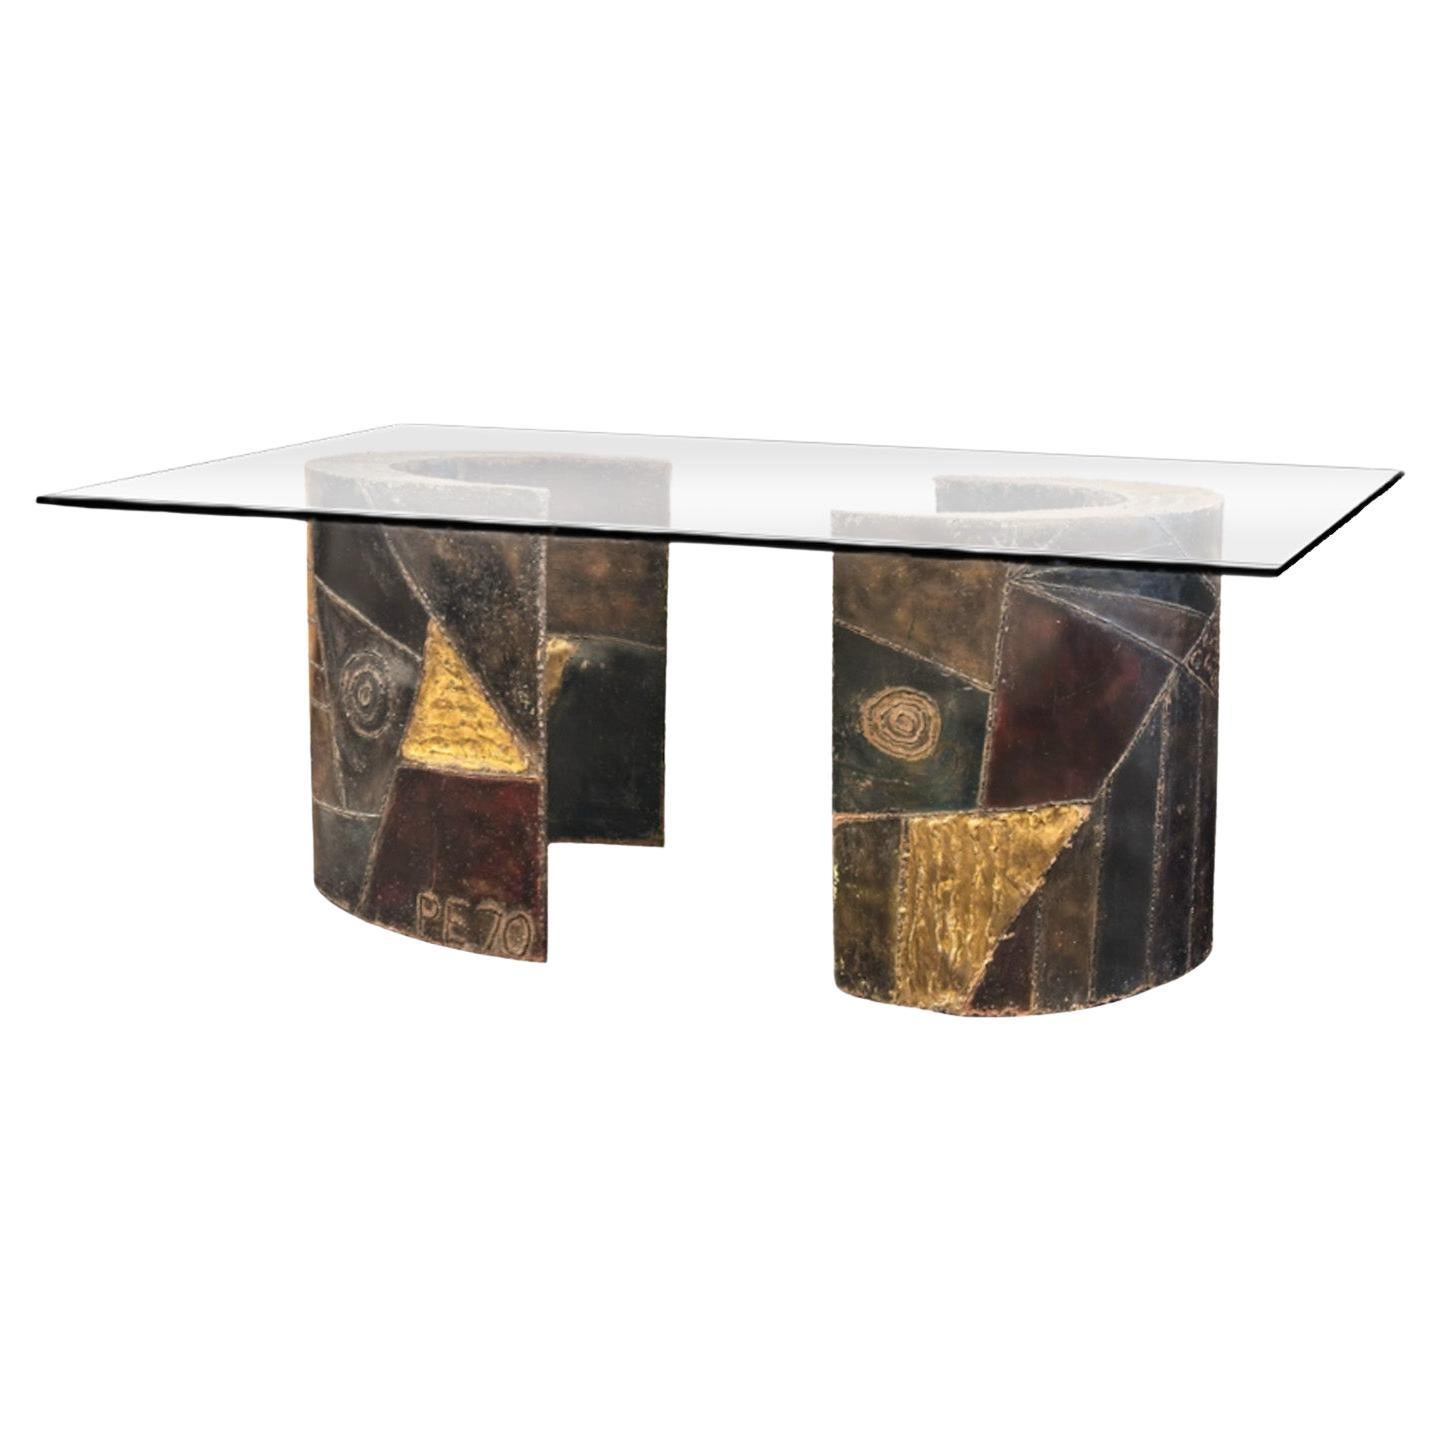 Paul Evans Welded Steel & Glass Crescent Base Dining Table 1970 (Signed) For Sale